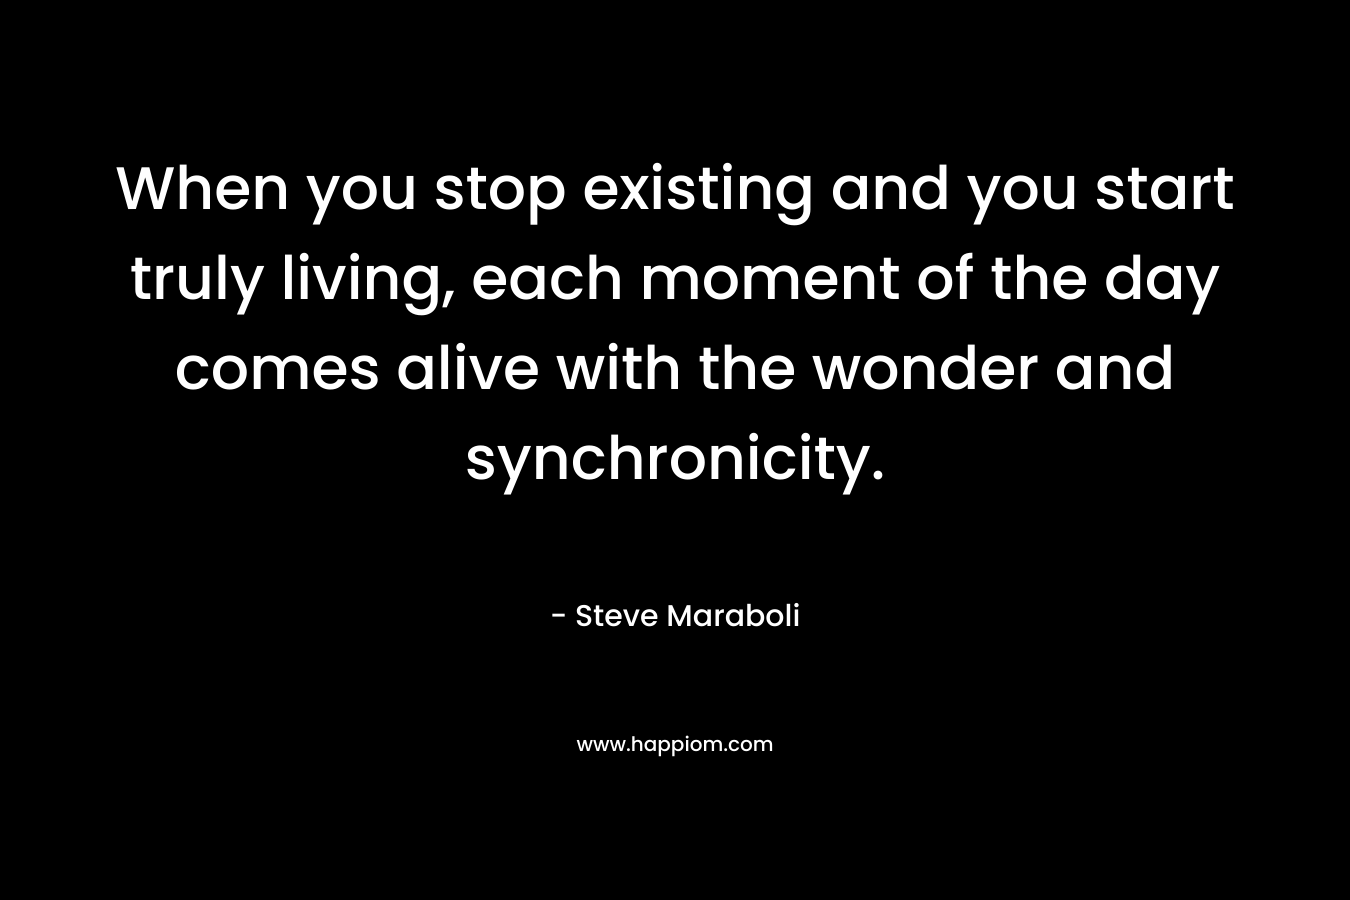 When you stop existing and you start truly living, each moment of the day comes alive with the wonder and synchronicity.